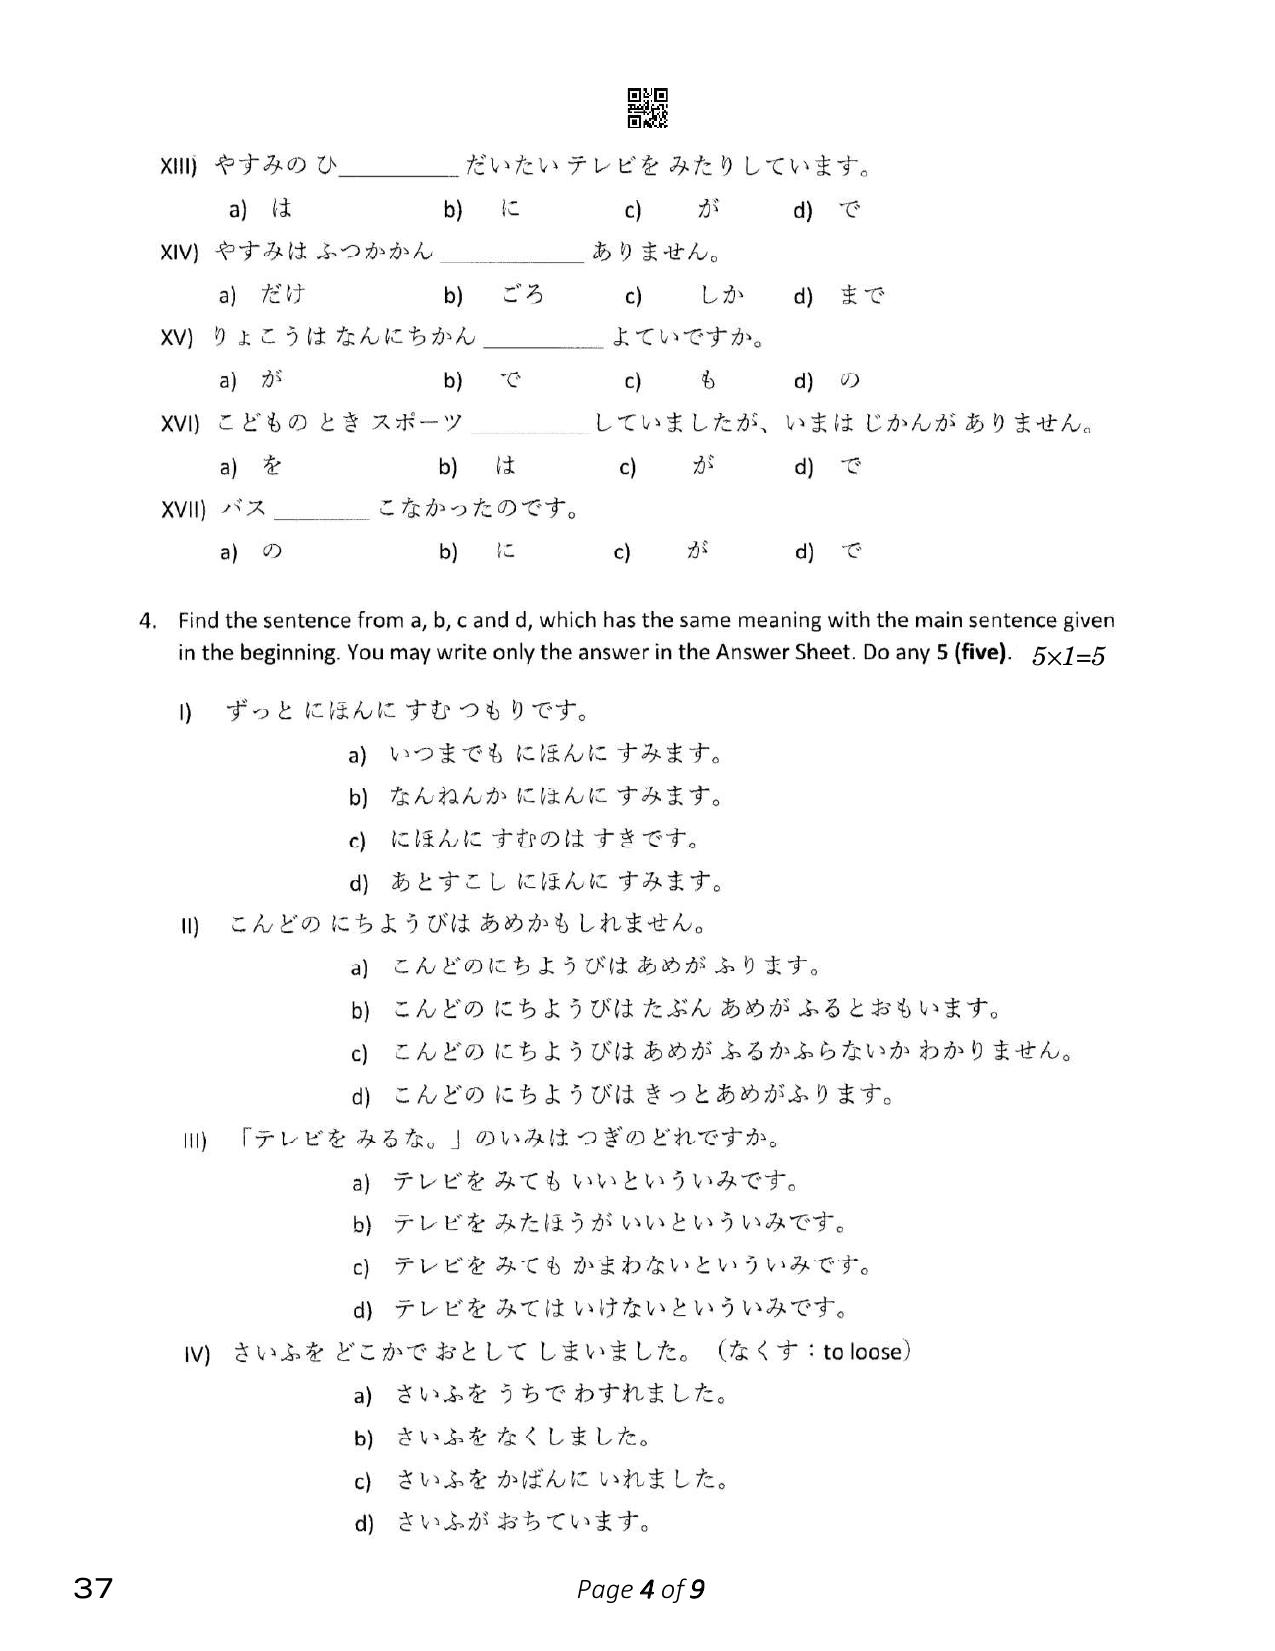 CBSE Class 12 Japanese (Compartment) 2023 Question Paper - Page 4